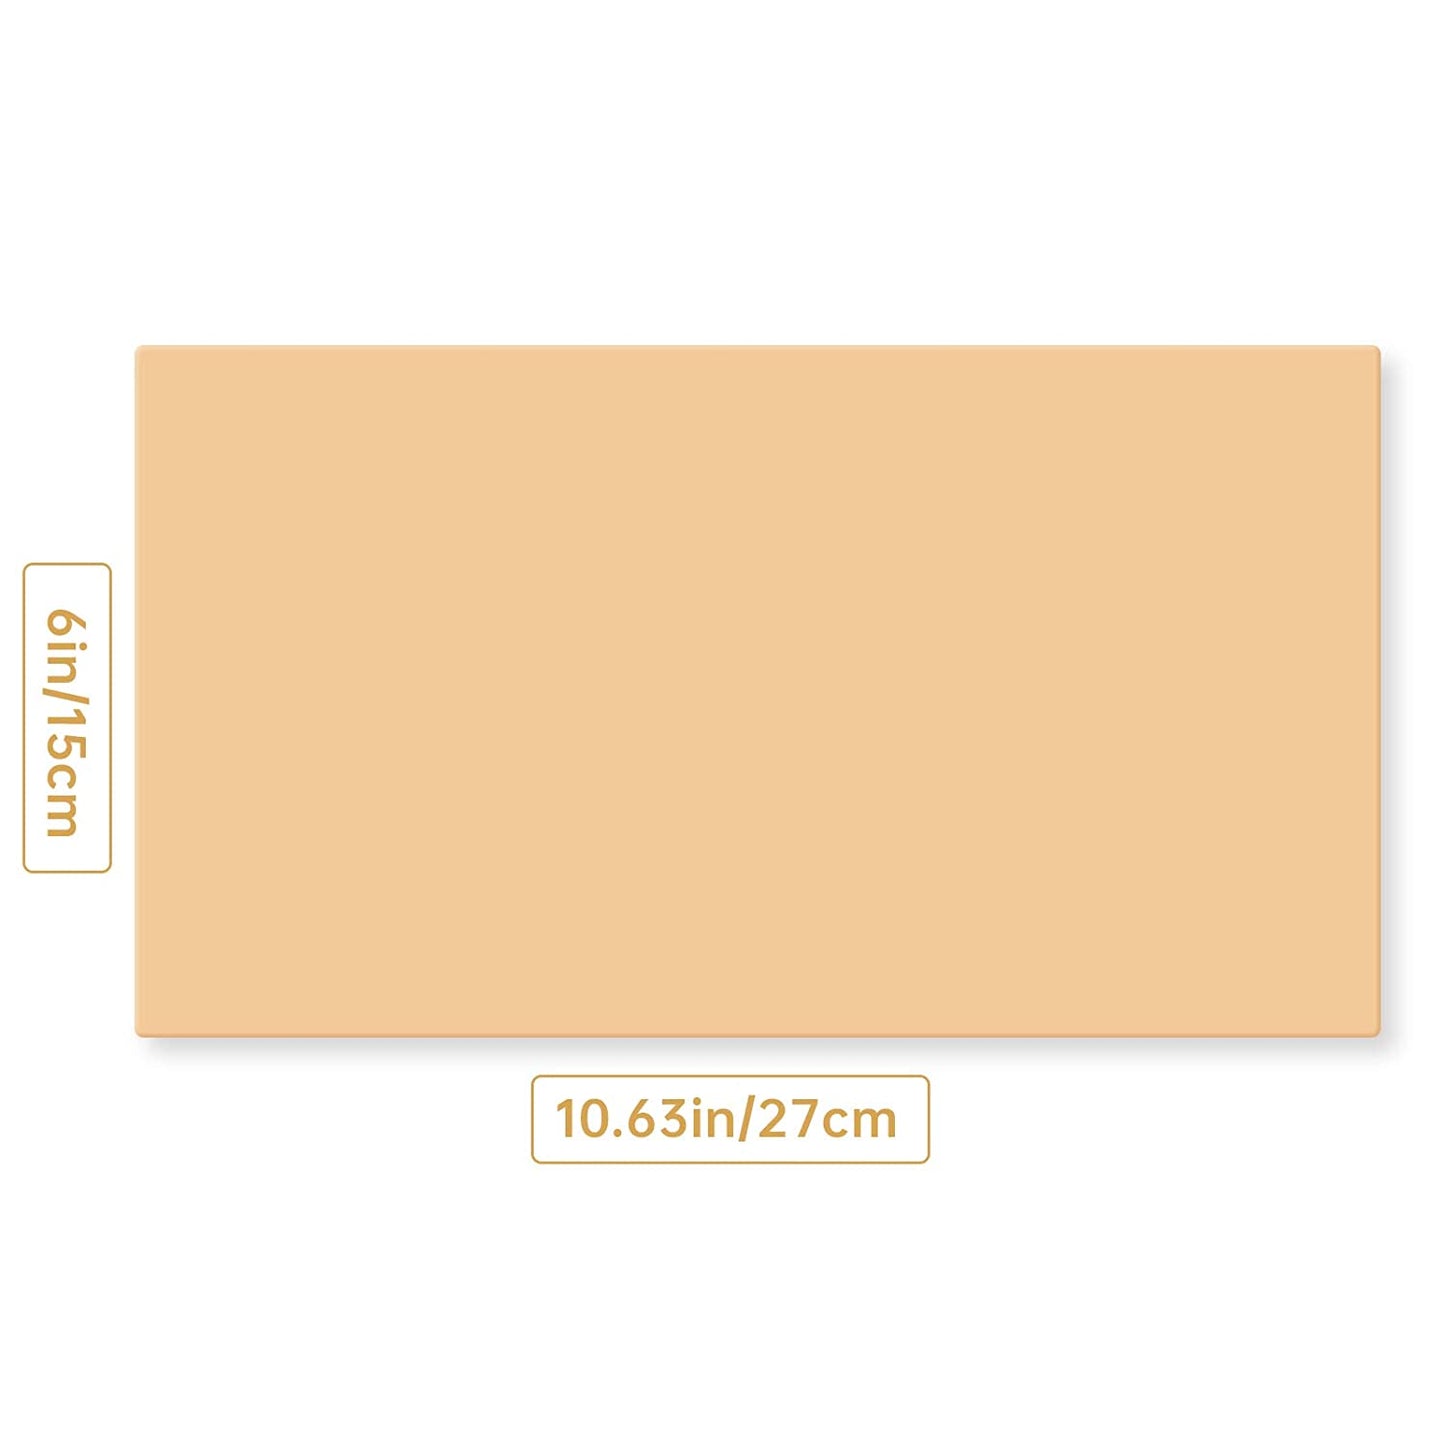 MFW Blank Tattoo Practice Skin, 10.7 x 6" 2MM Thick Double Sides Tattooing Eyebrow Practice Skin Large Size 5 Sheets for Beginners and Experienced Tattoo Artists